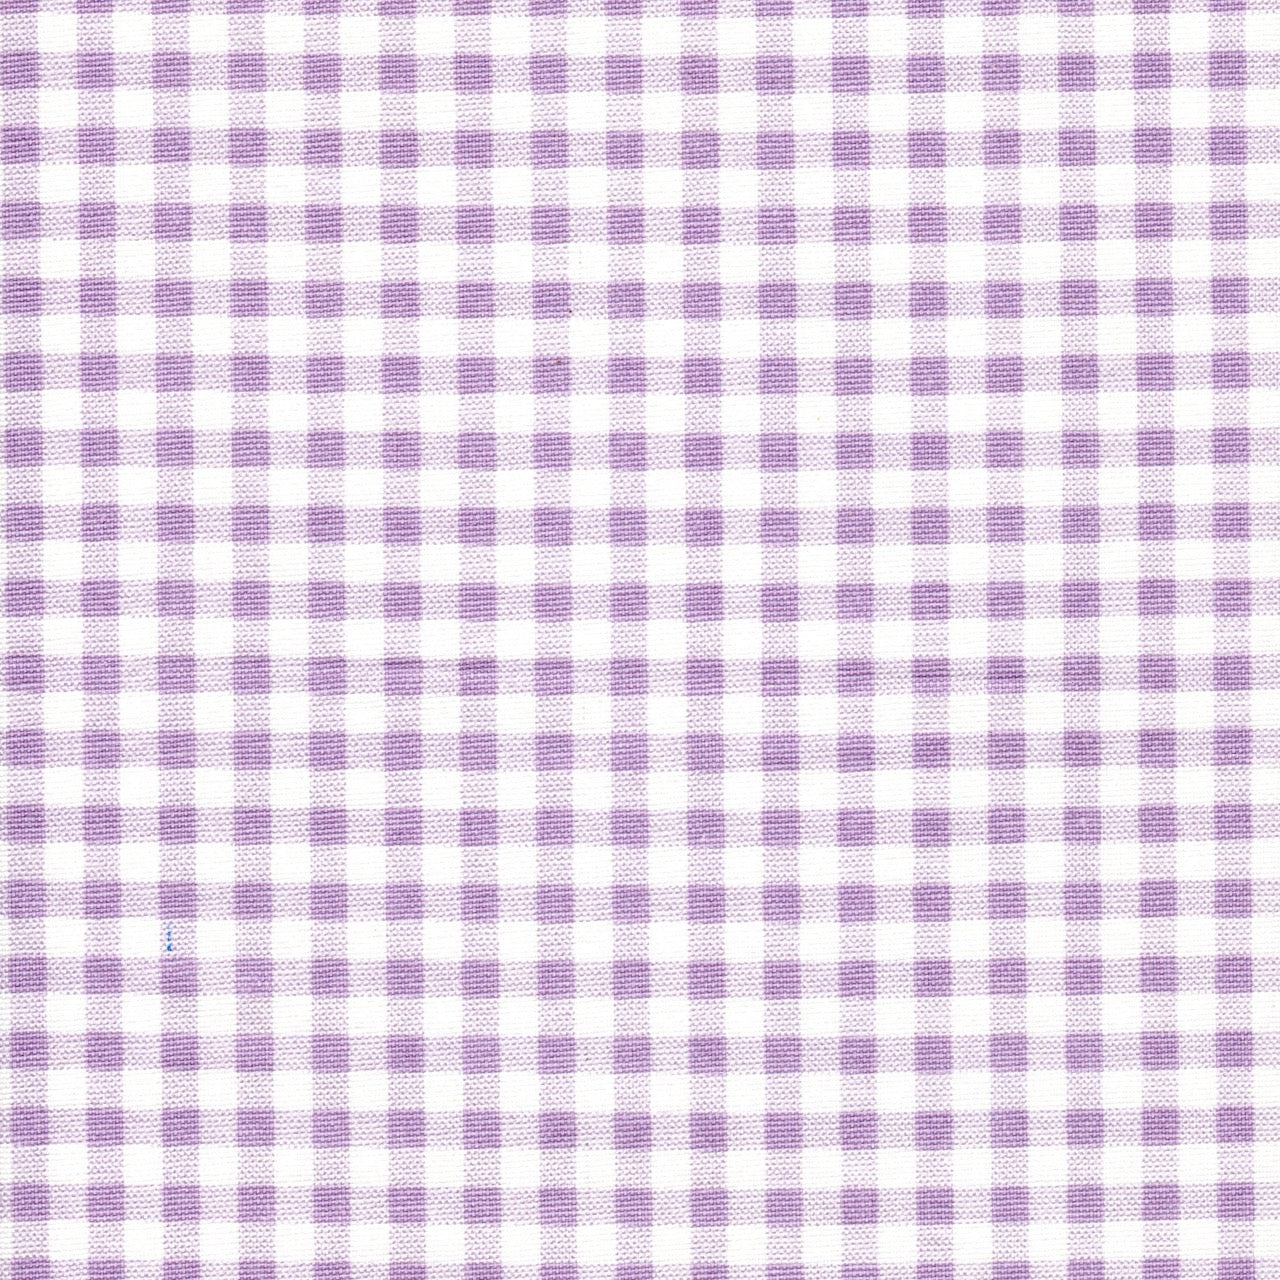 Pillow Sham in Orchid Large Gingham Check on White